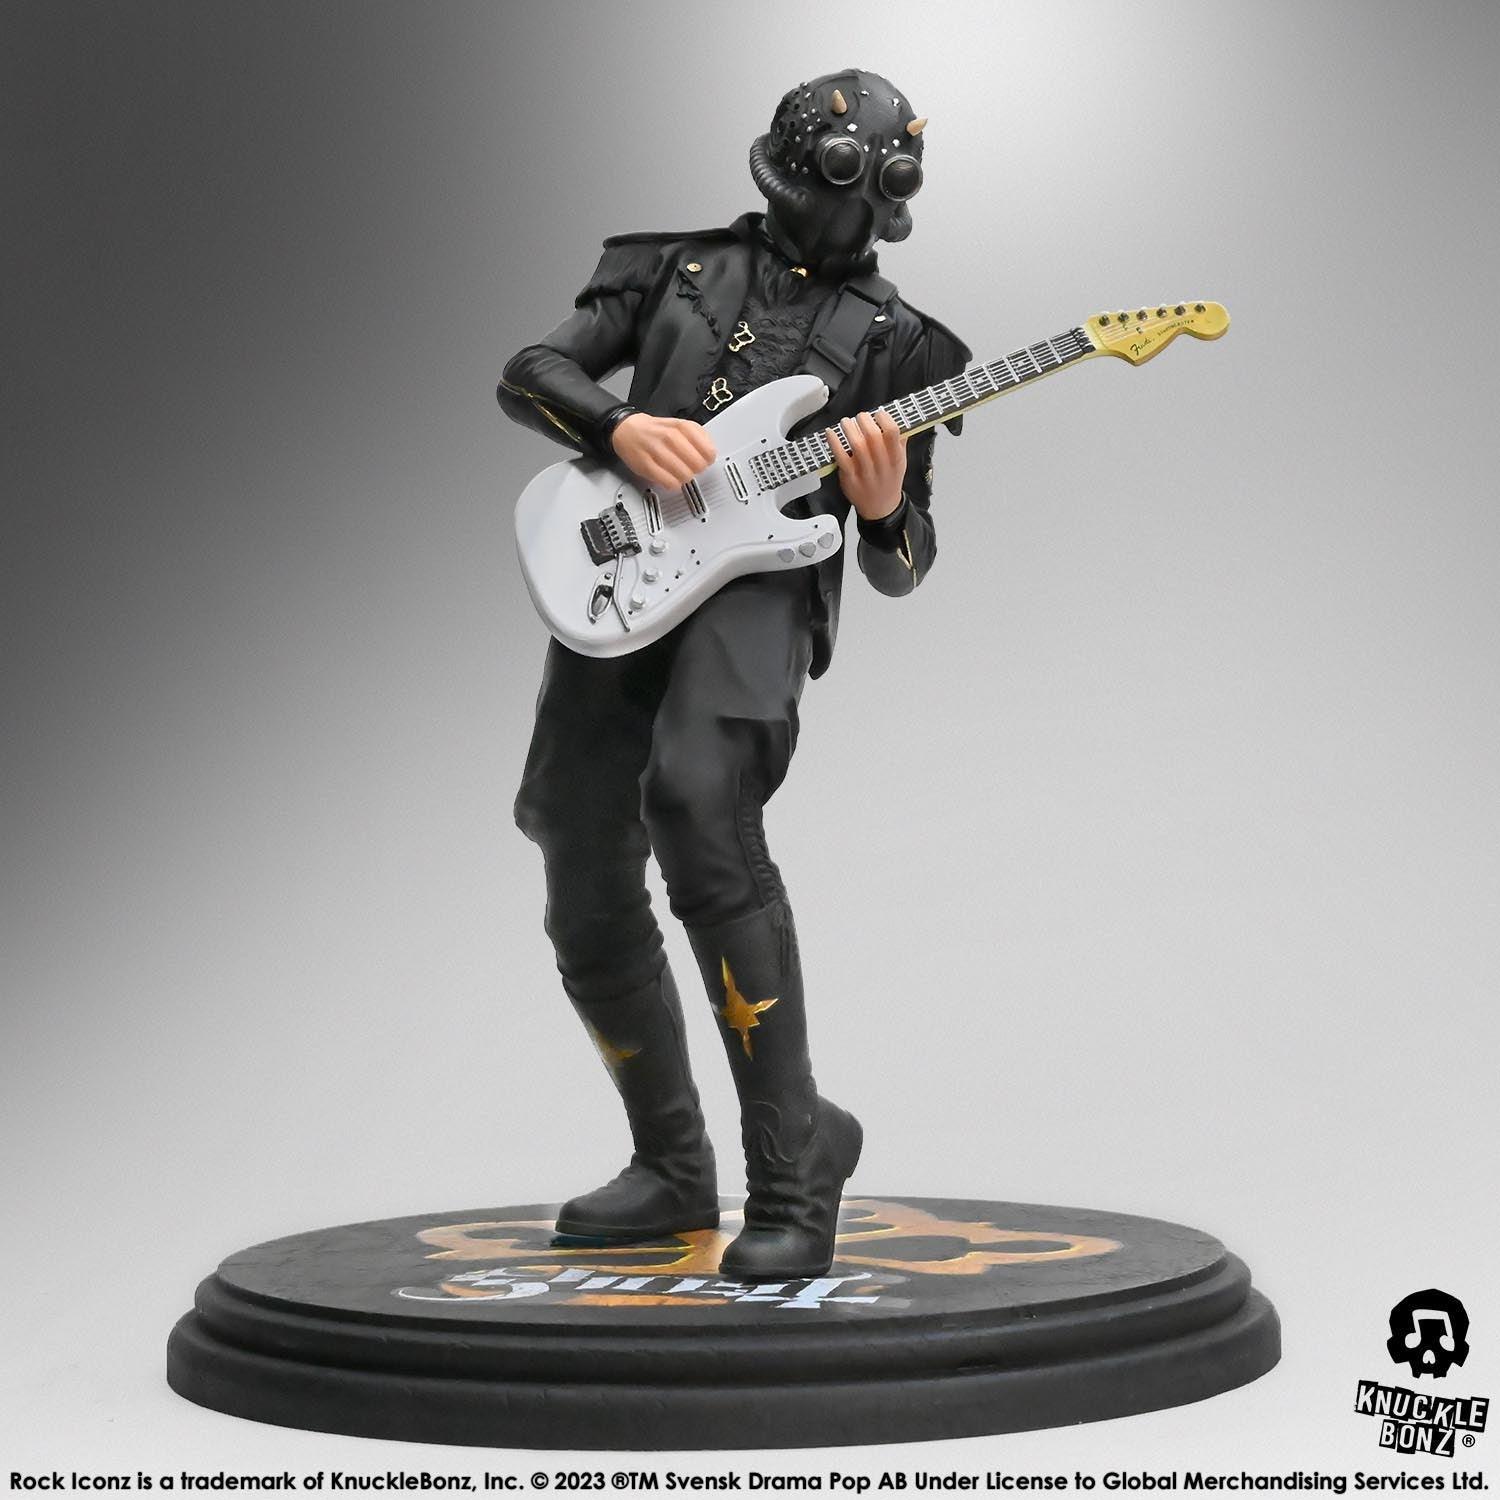 Ghost - Nameless Ghoul 2 with White Guitar Rock Iconz Statue Rock Iconz Statue by KnuckleBonz | Titan Pop Culture